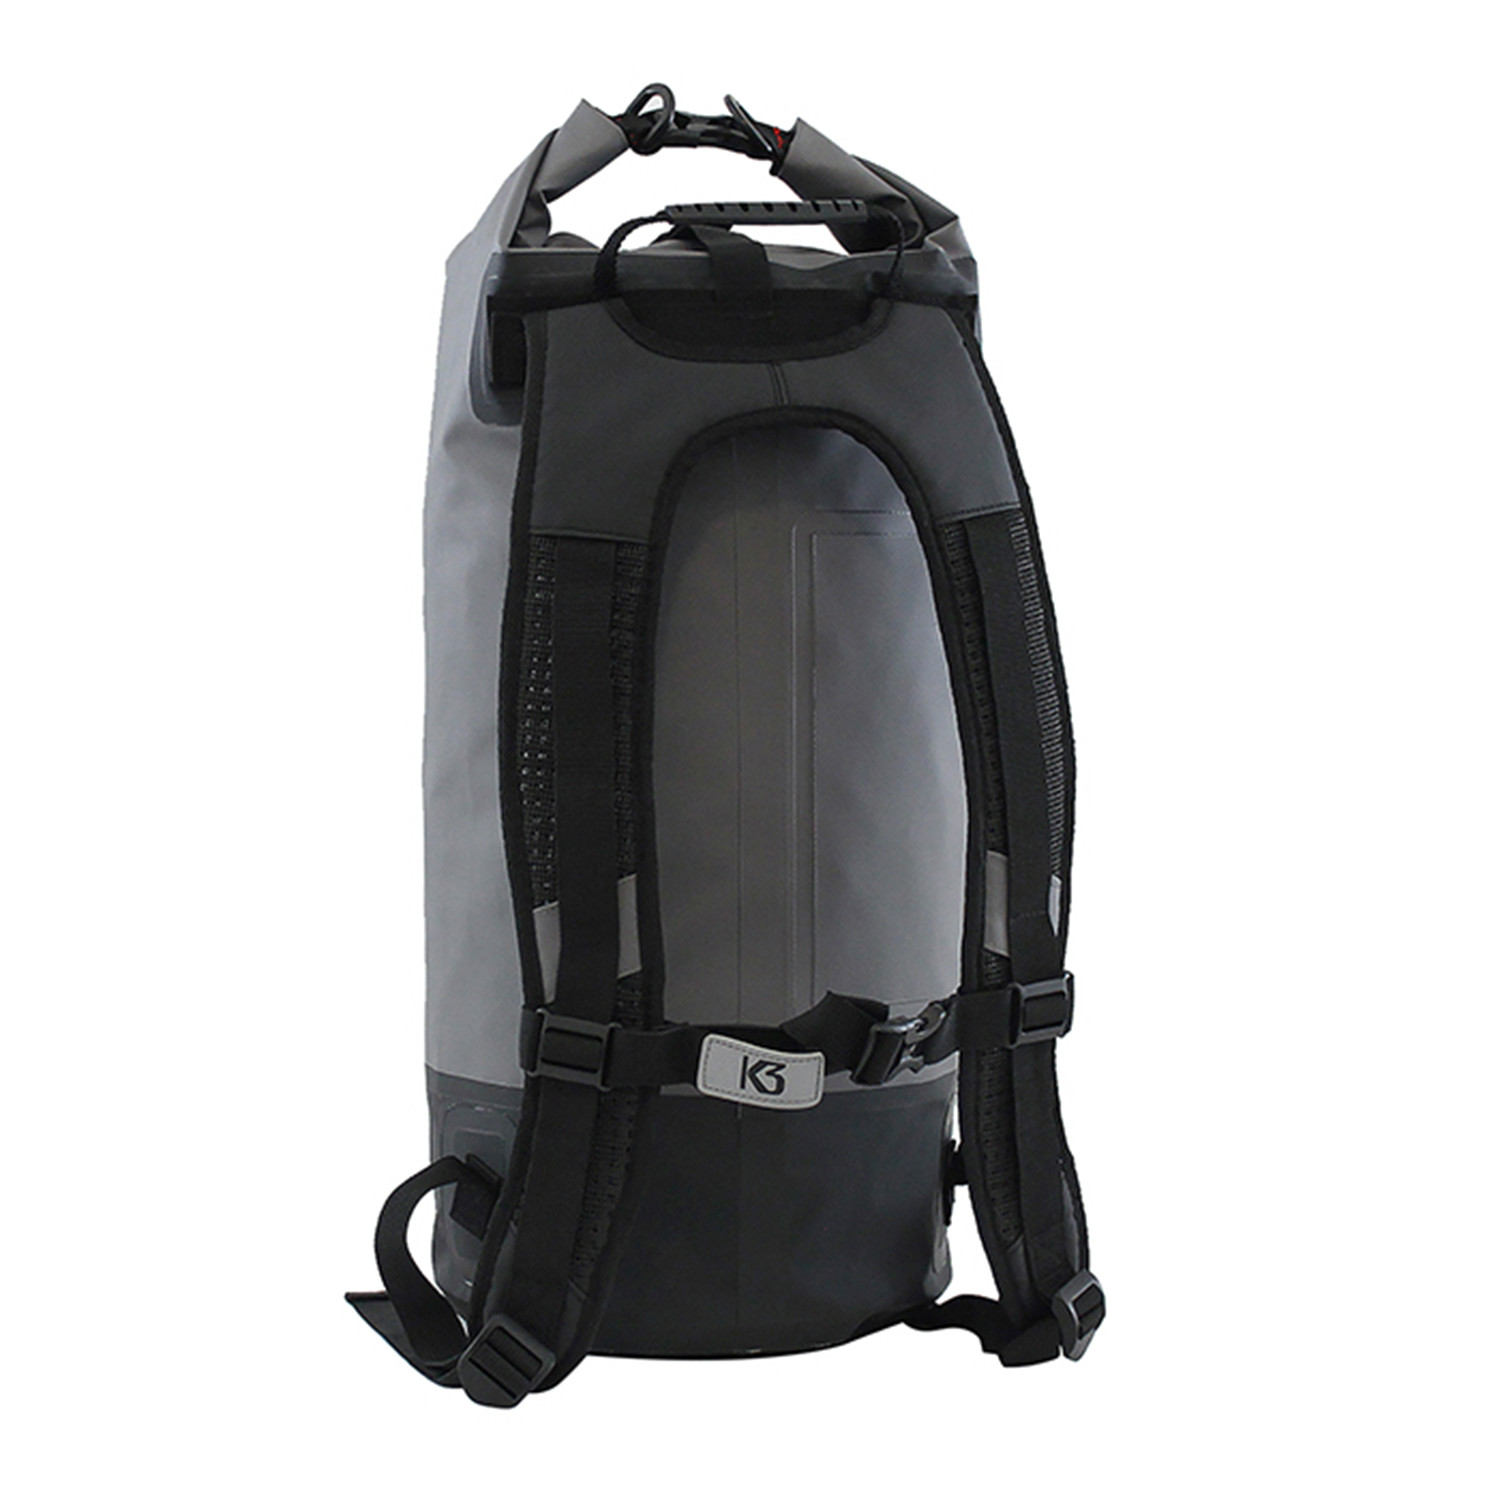 Surge Waterproof Backpack // 20 Liter (White) - K3 - Touch of Modern